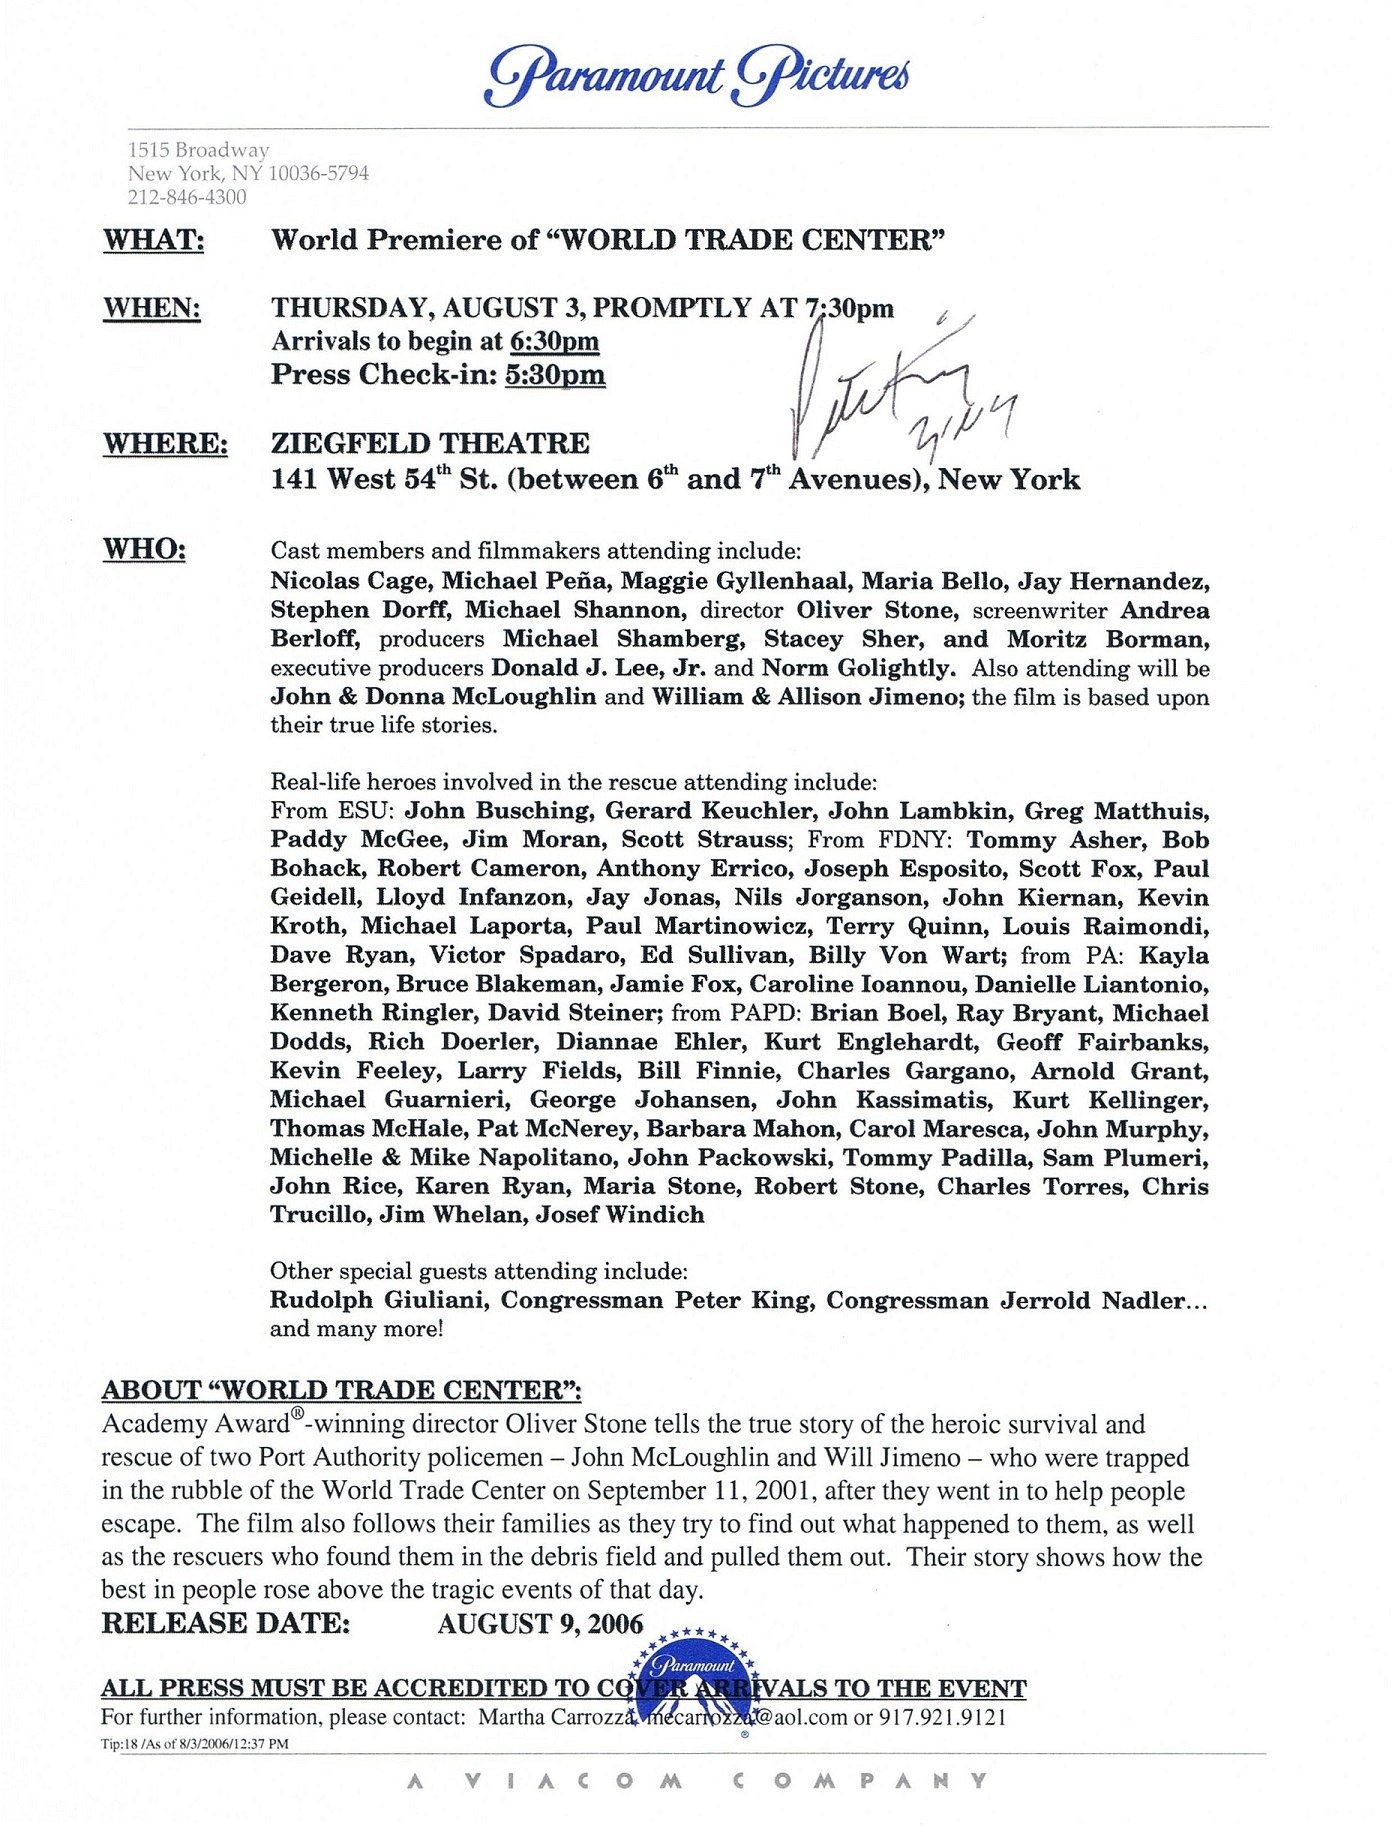 A document with a blue PARAMOUNT logo at the top and black text